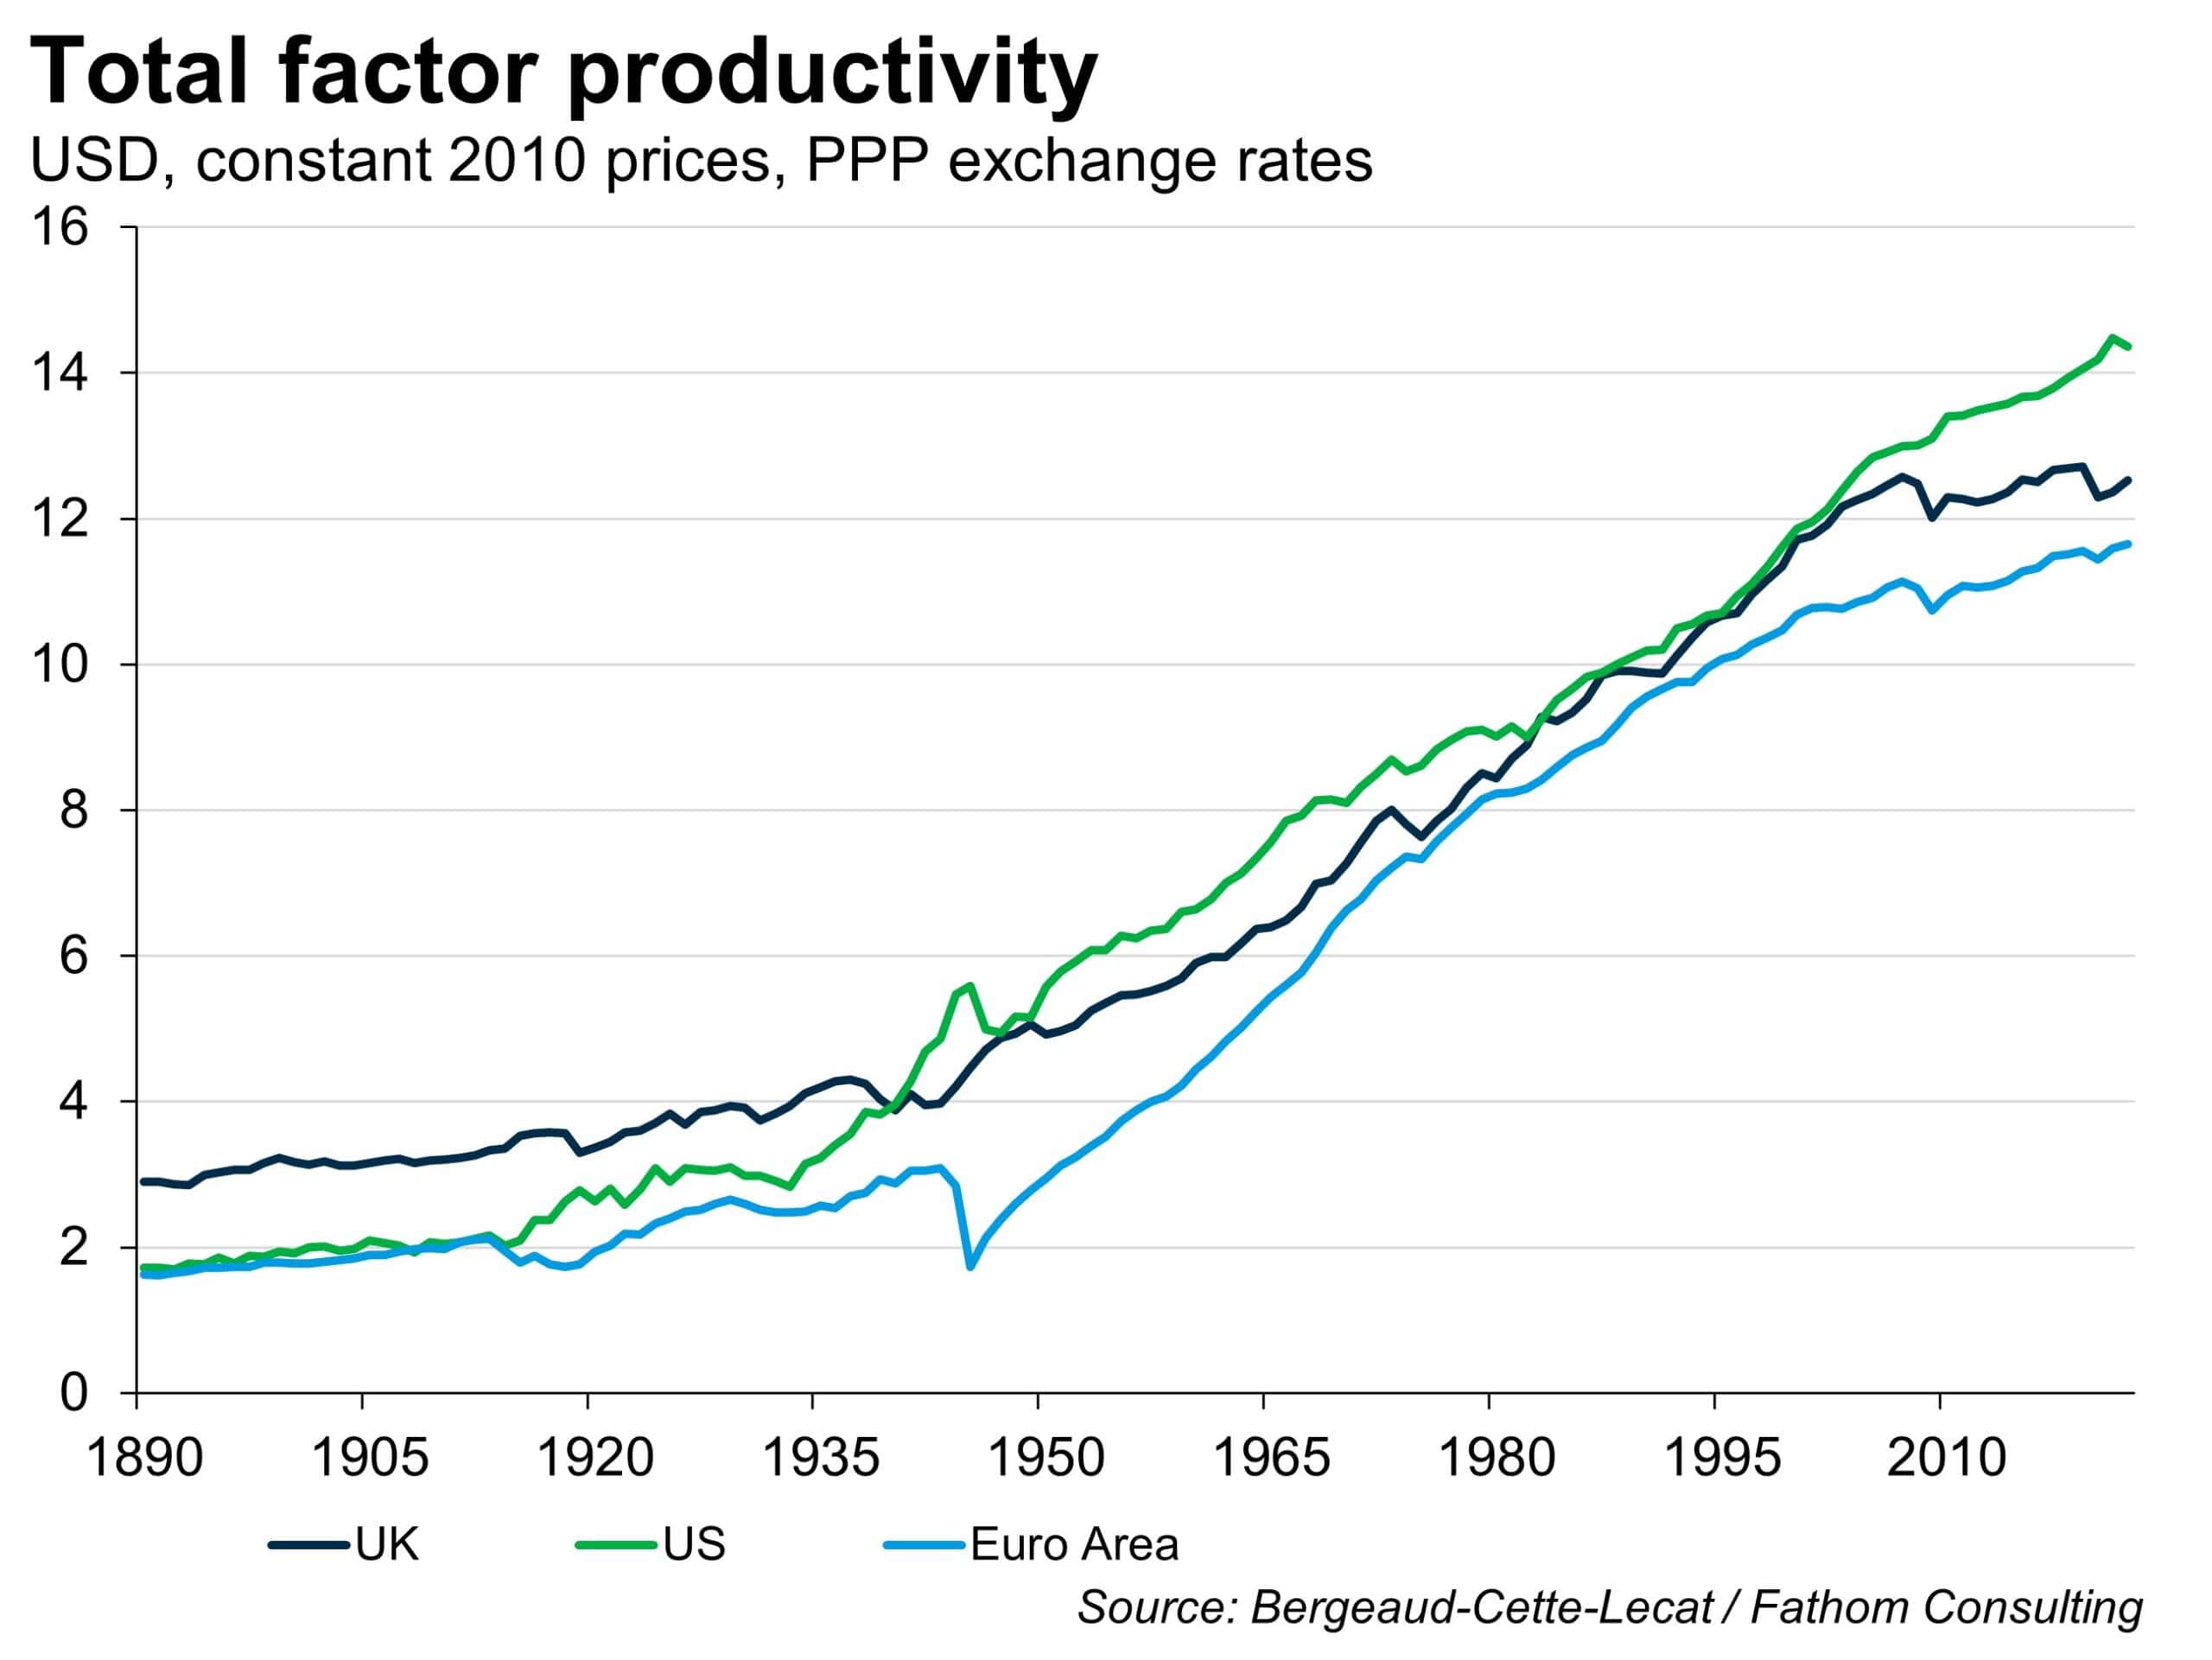 A boost to total factor productivity may be one of the benefits of higher rates for longer